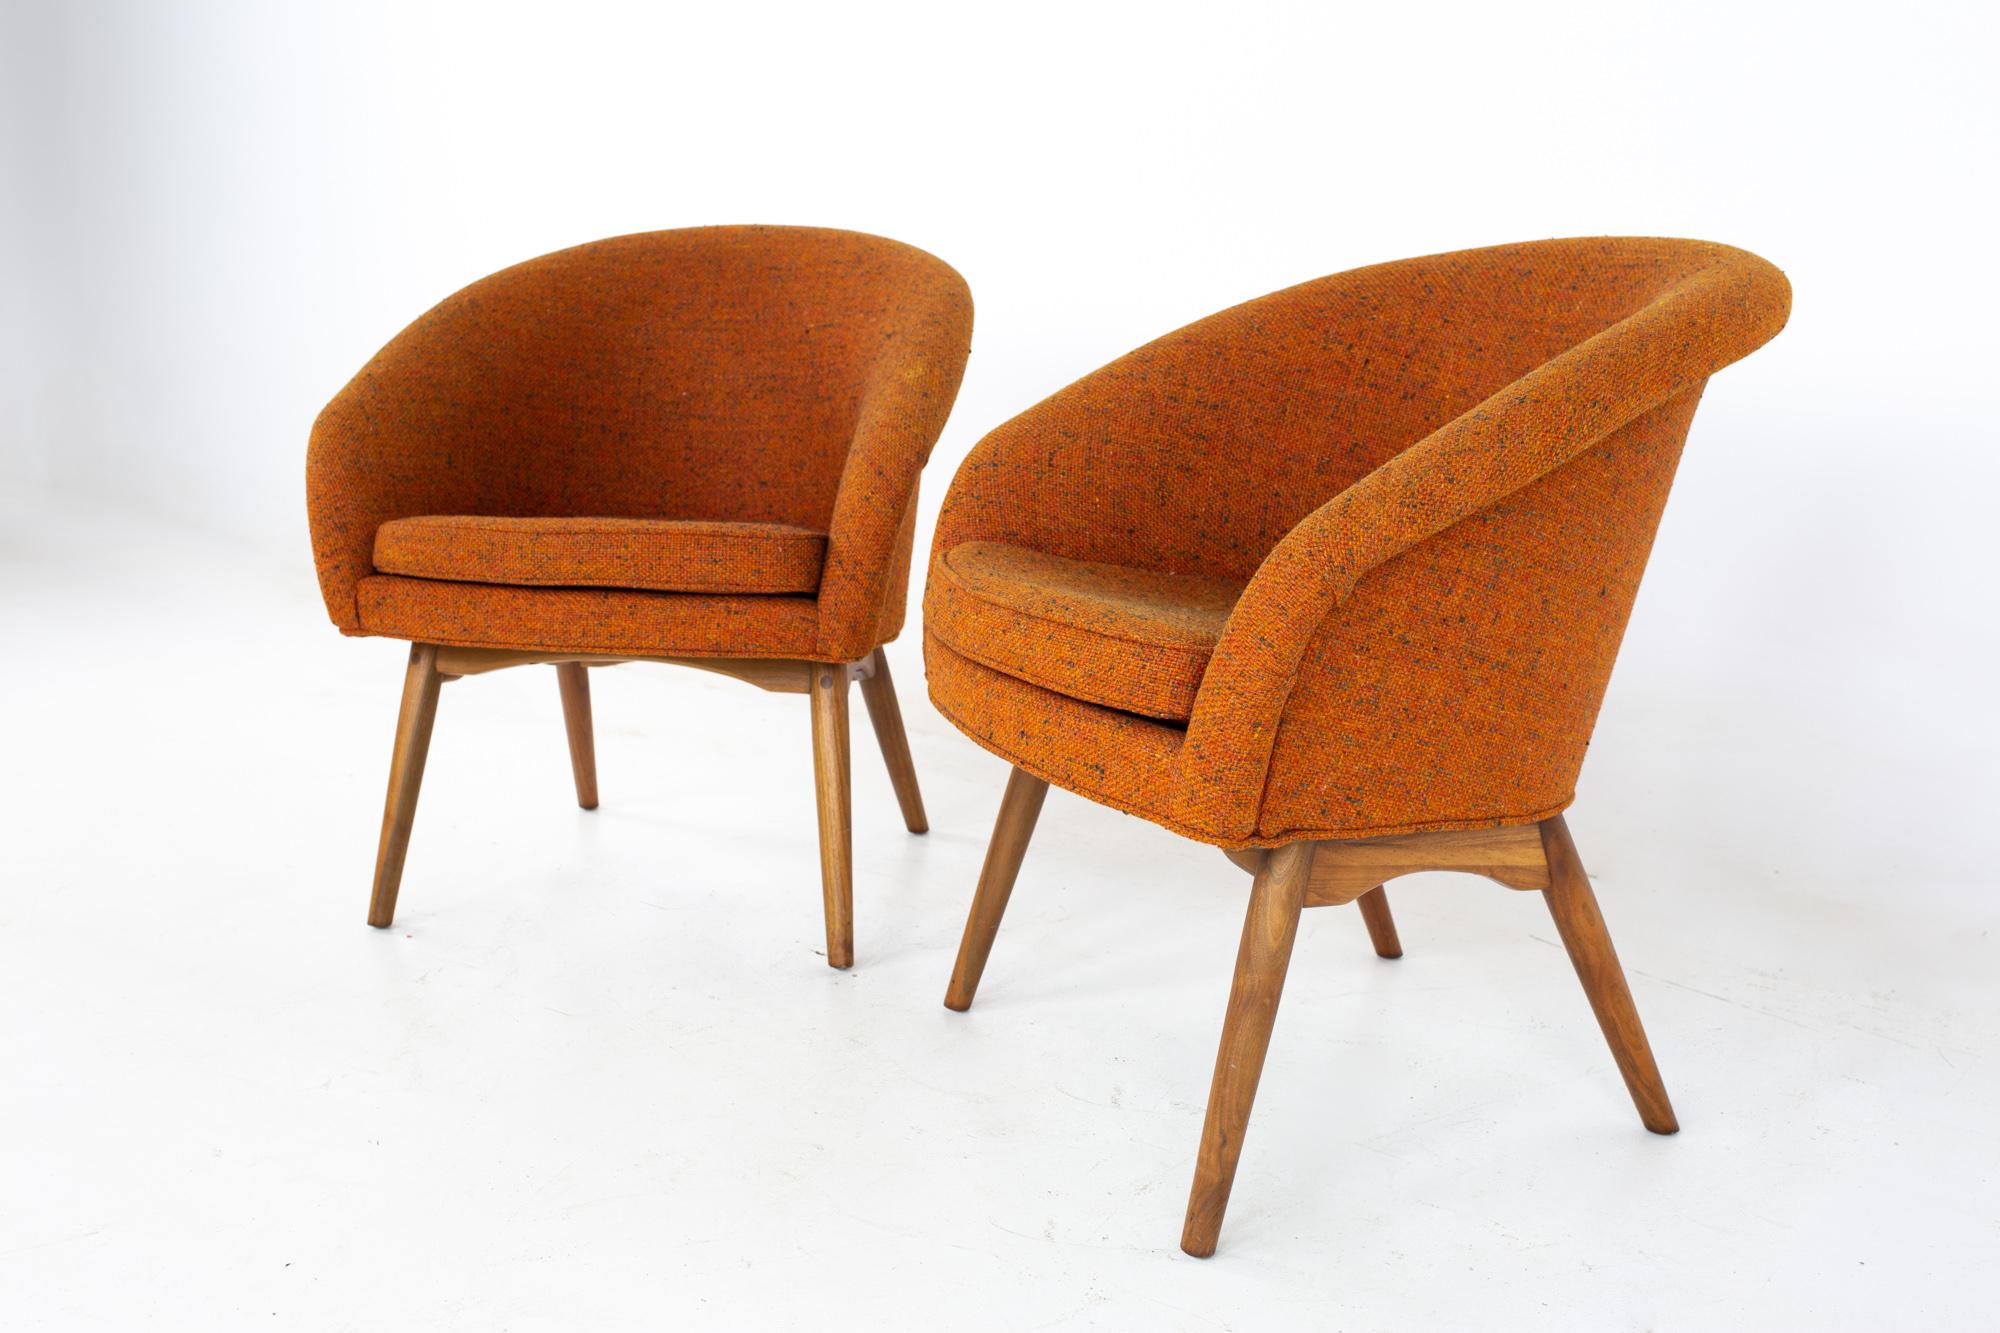 Milo Baughman for Thayer Coggin mid century orange upholstered lounge chairs - a pair
Each chair measures: 28 wide x 28 deep x 30 high, with a seat height of 17 inches and an arm height 26 inches

All pieces of furniture can be had in what we